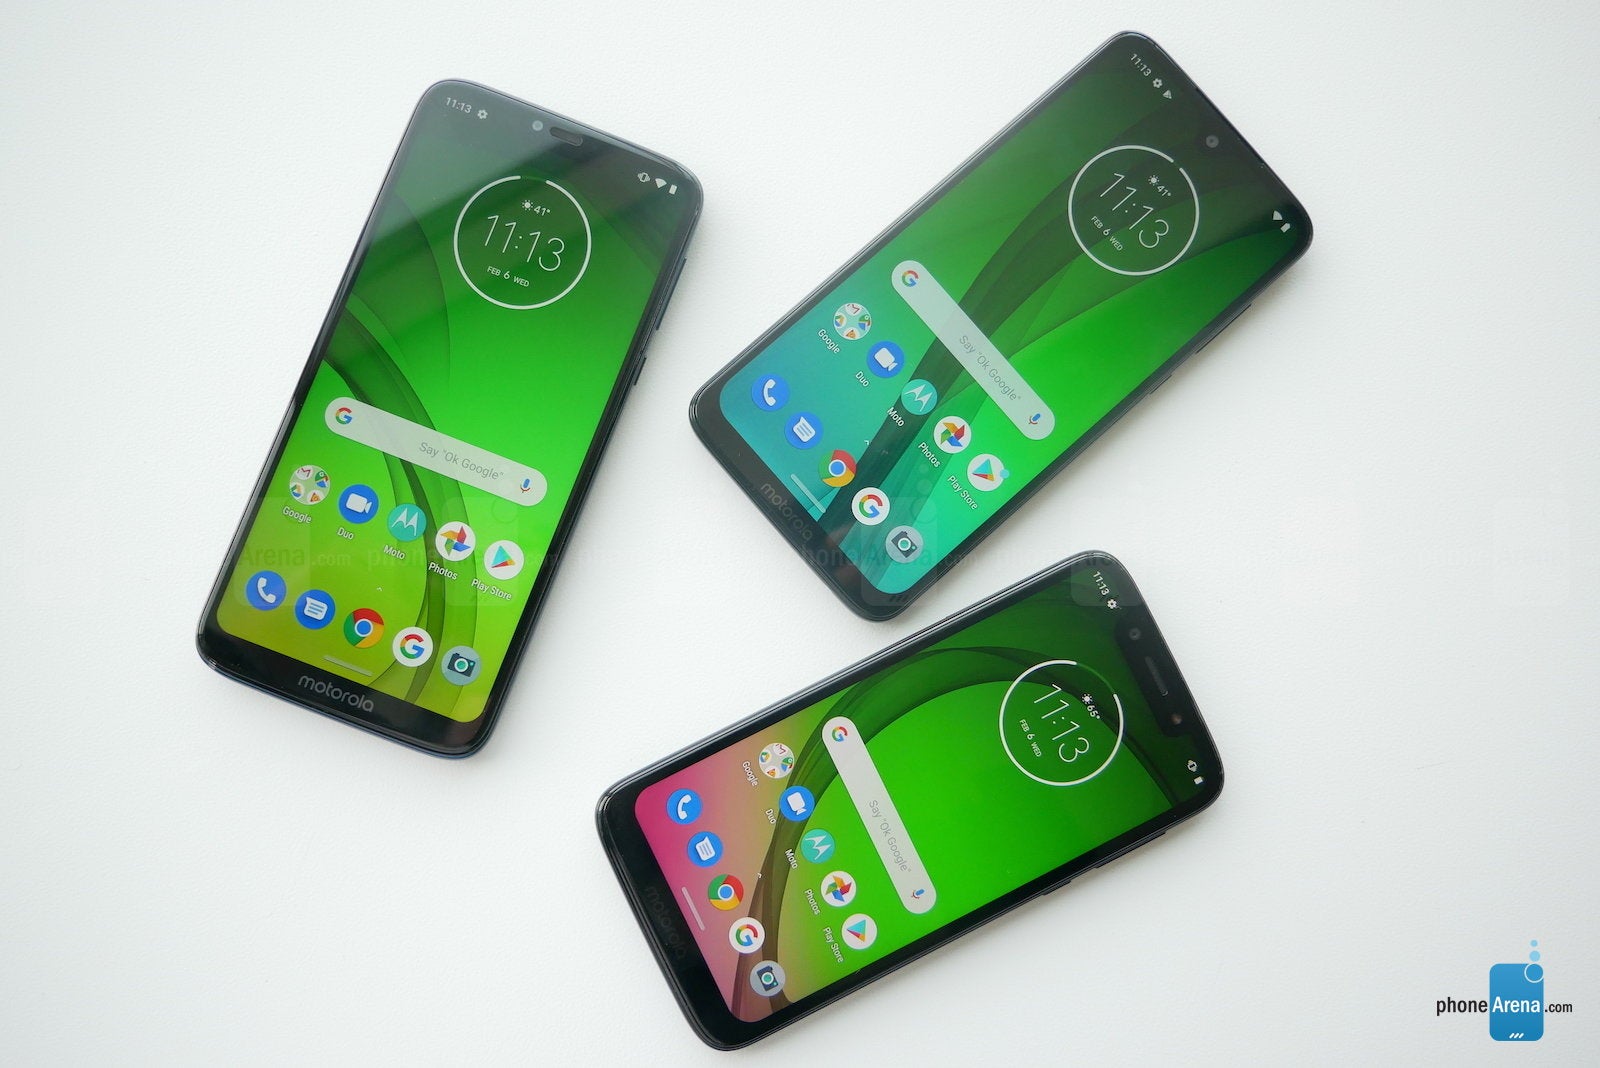 Moto G7, G7 Power, and G7 Play hands-on